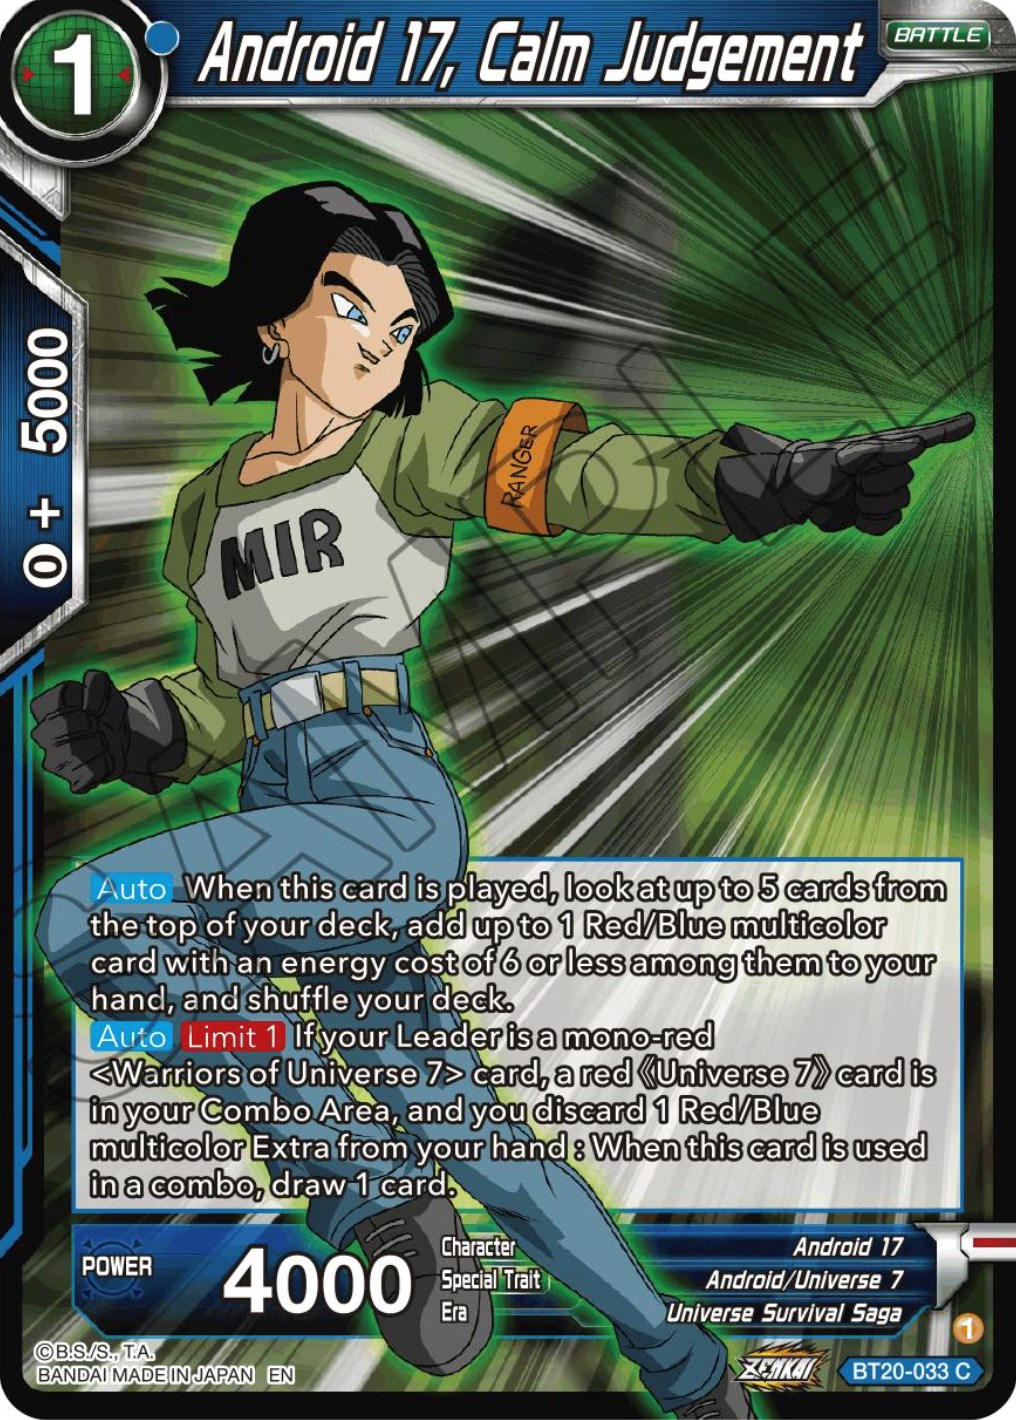 Android 16 - Power Absorbed - Dragon Ball Super CCG